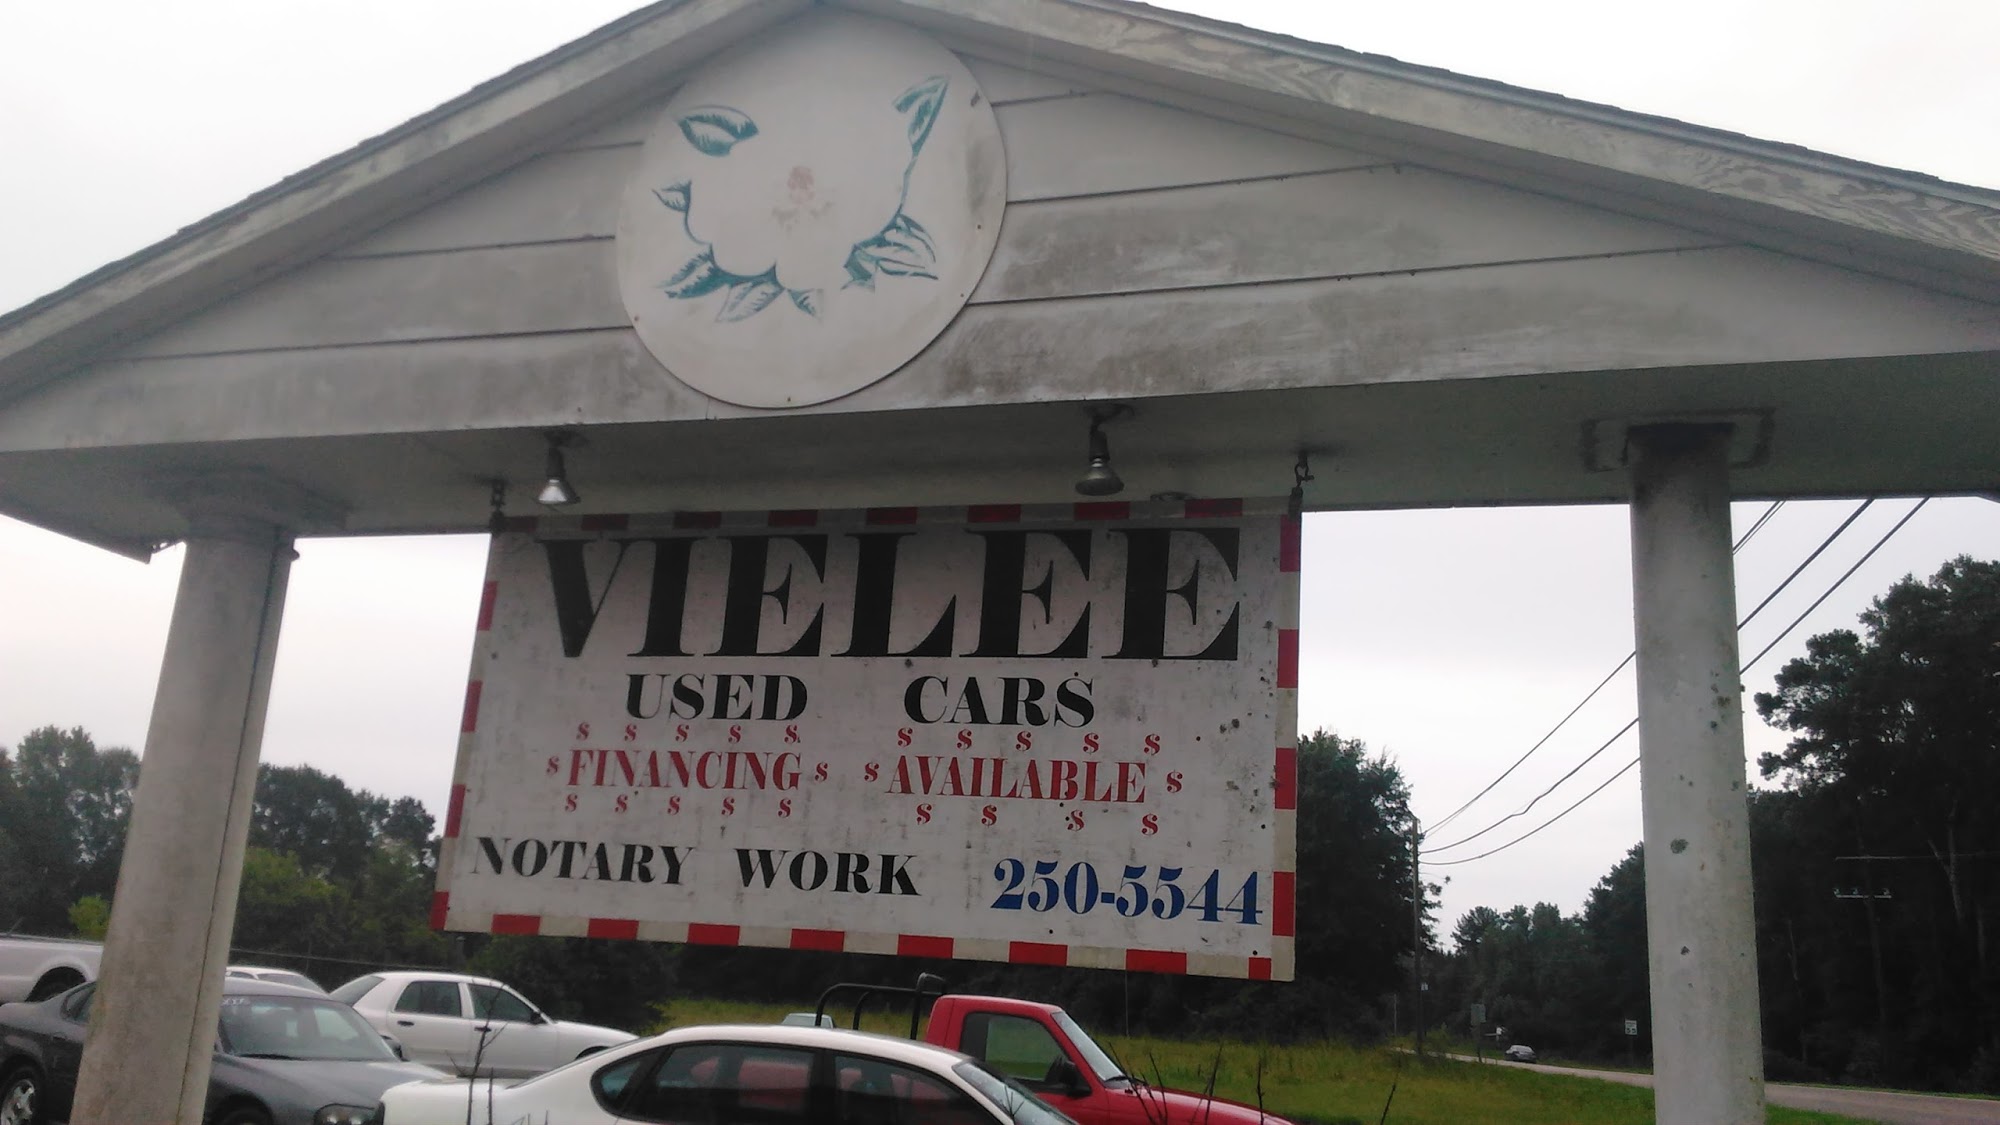 Vielee's Used Cars & Parts